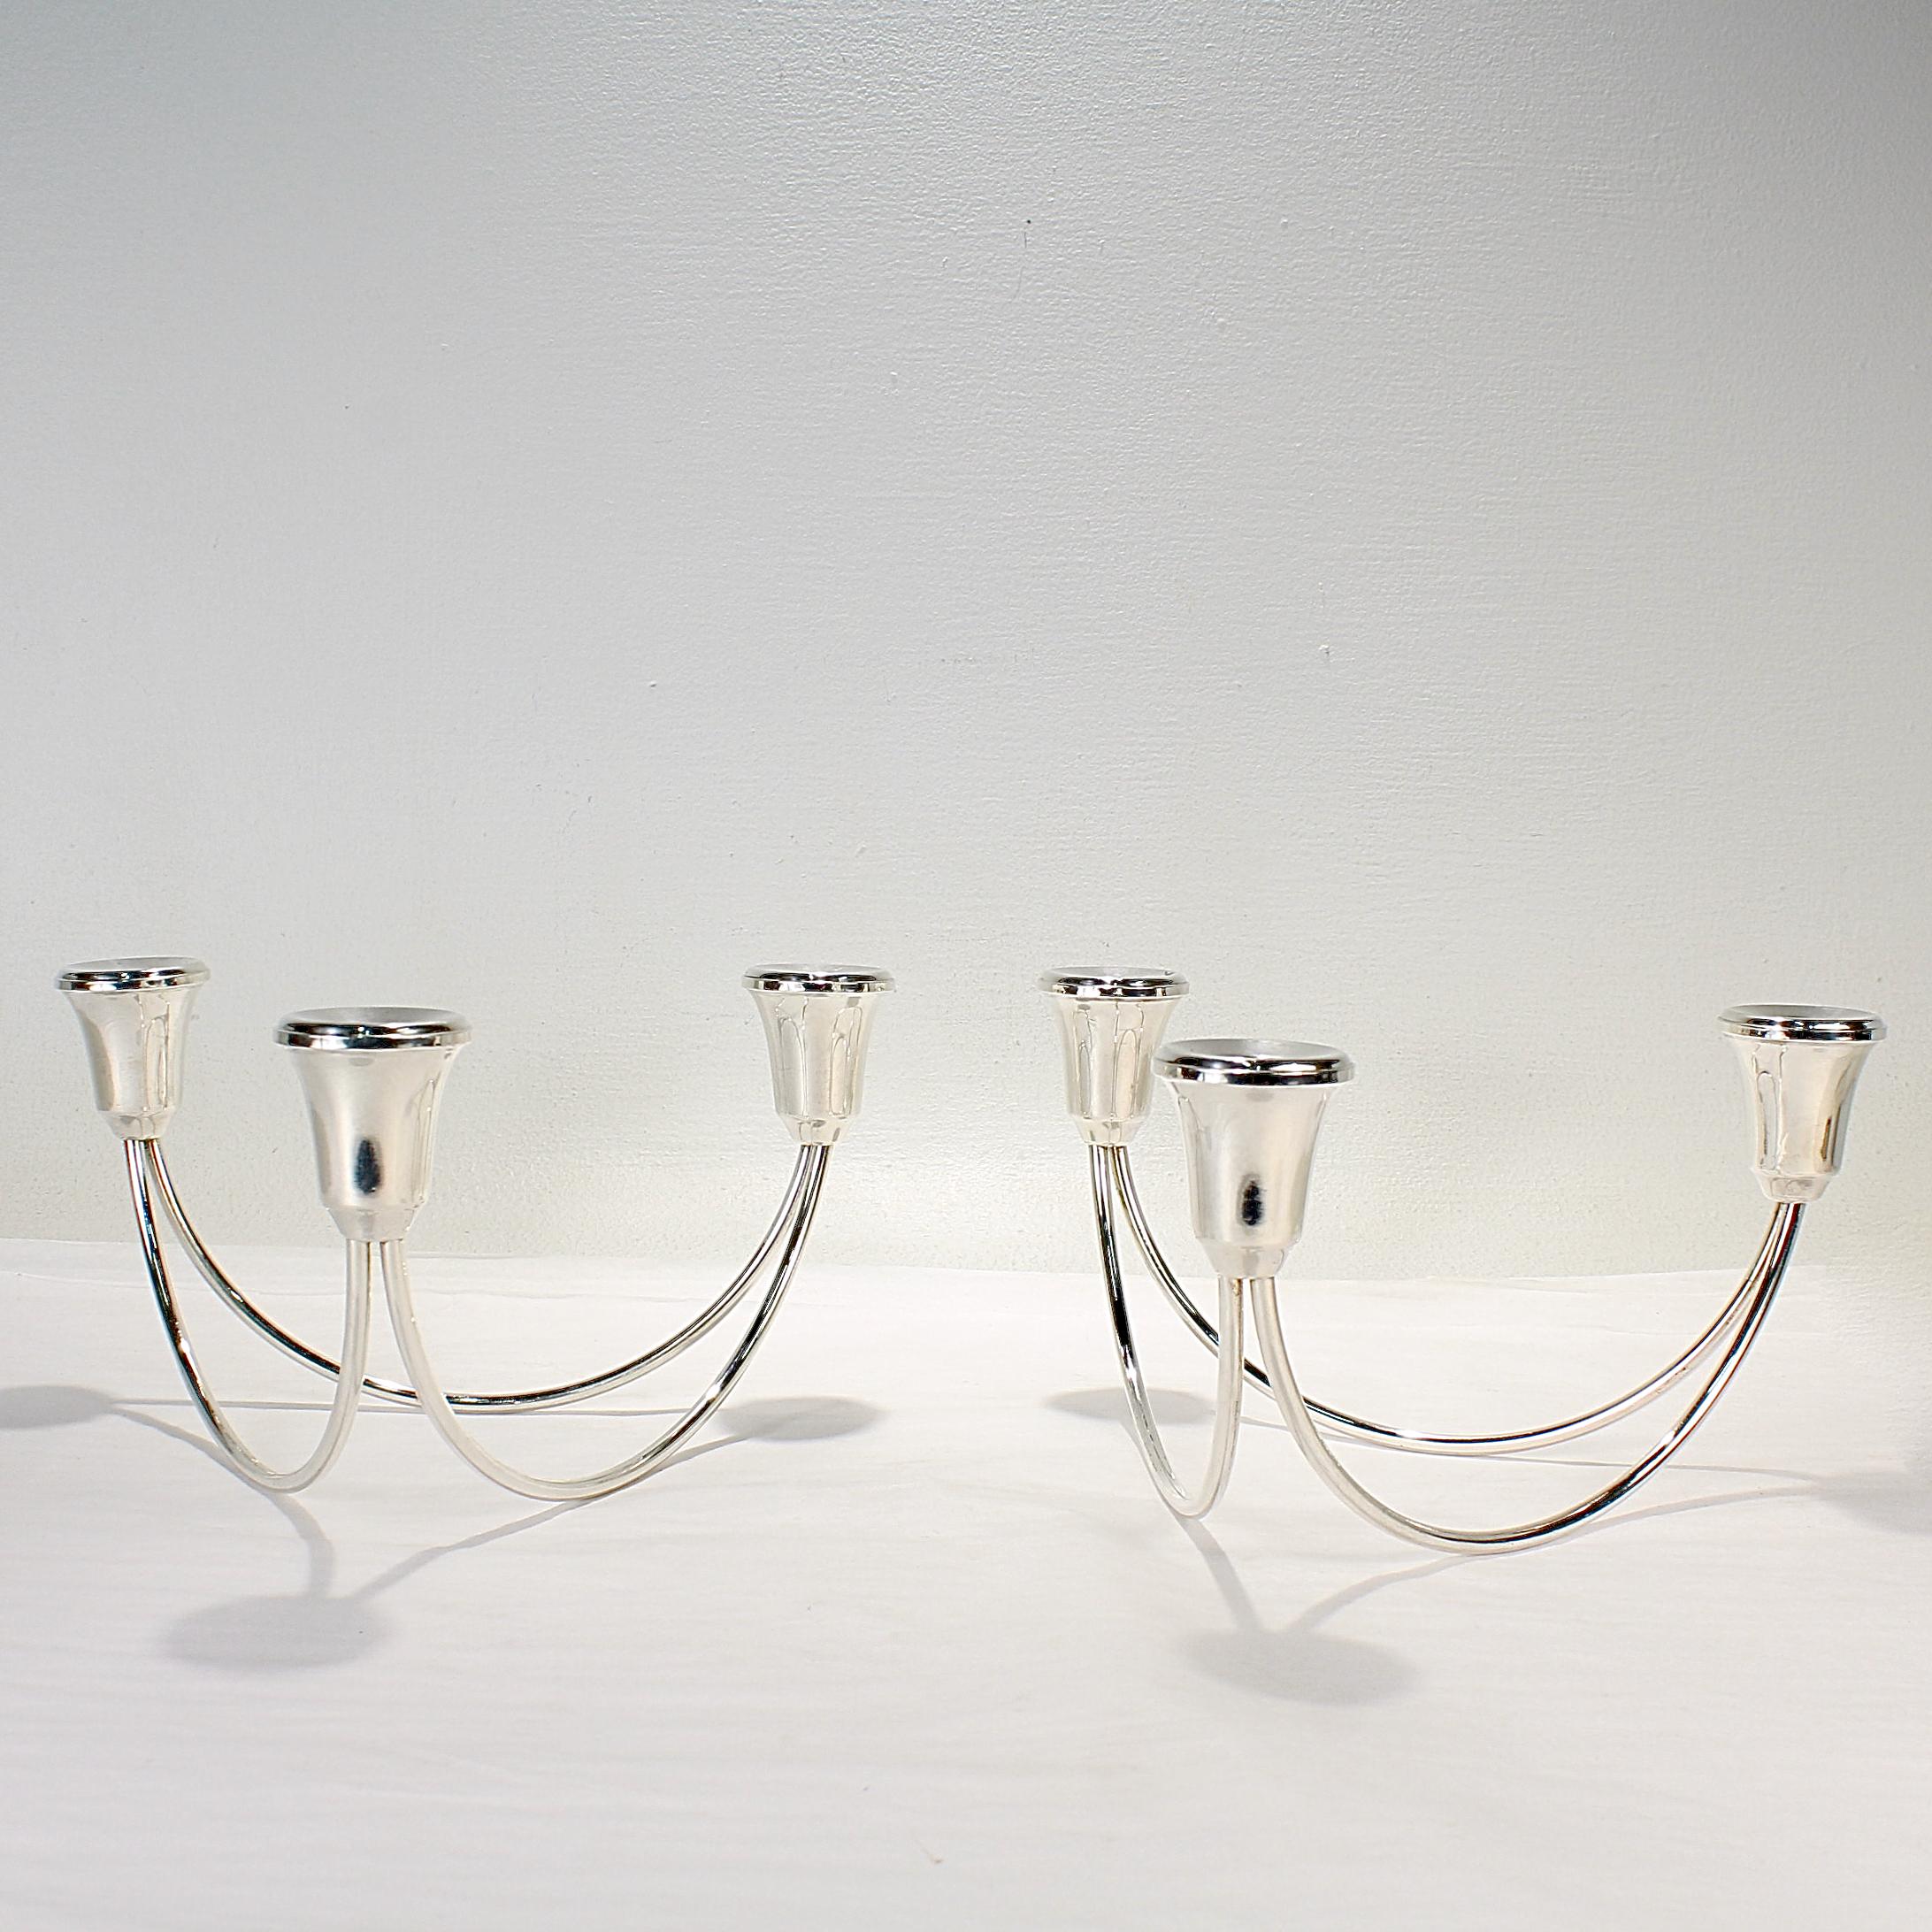 A fine pair of Mid Century Modern candelabra or candle holders.

In sterling silver. 

Each with 3 candle cups connected by two sterling silver rounded rods. 

Perfect for the modern table!

Date:
20th Century

Overall Condition:
It is in overall